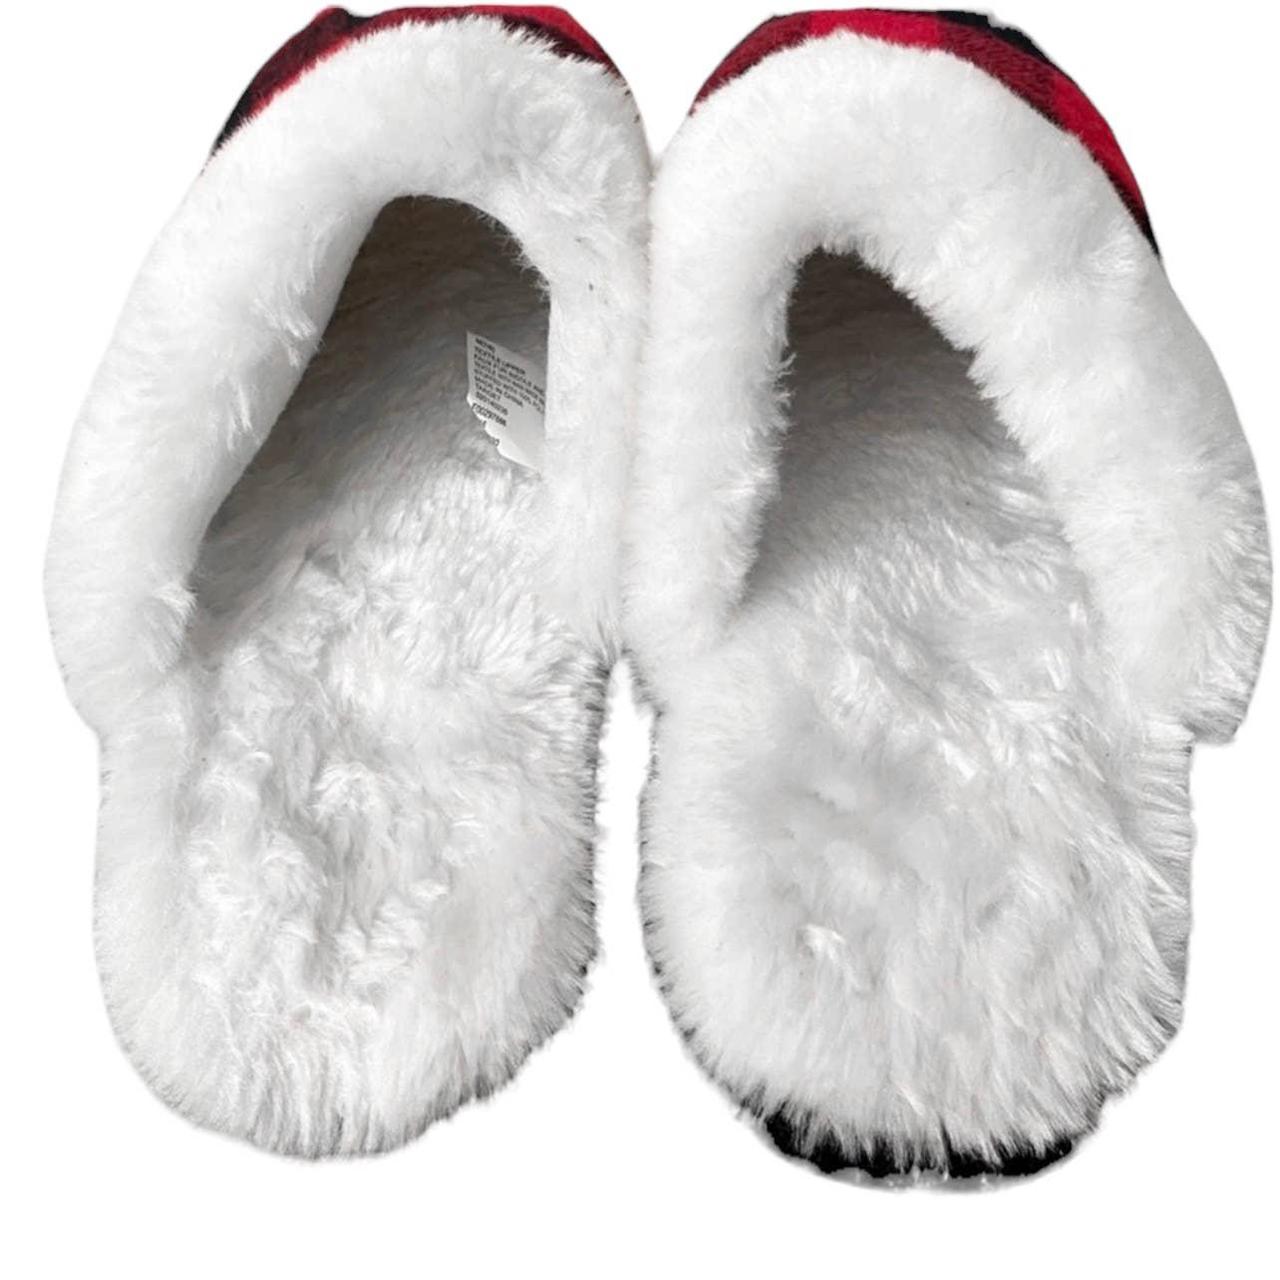 The Cozy House Slippers We Want To Buy Right Now - Emily Henderson